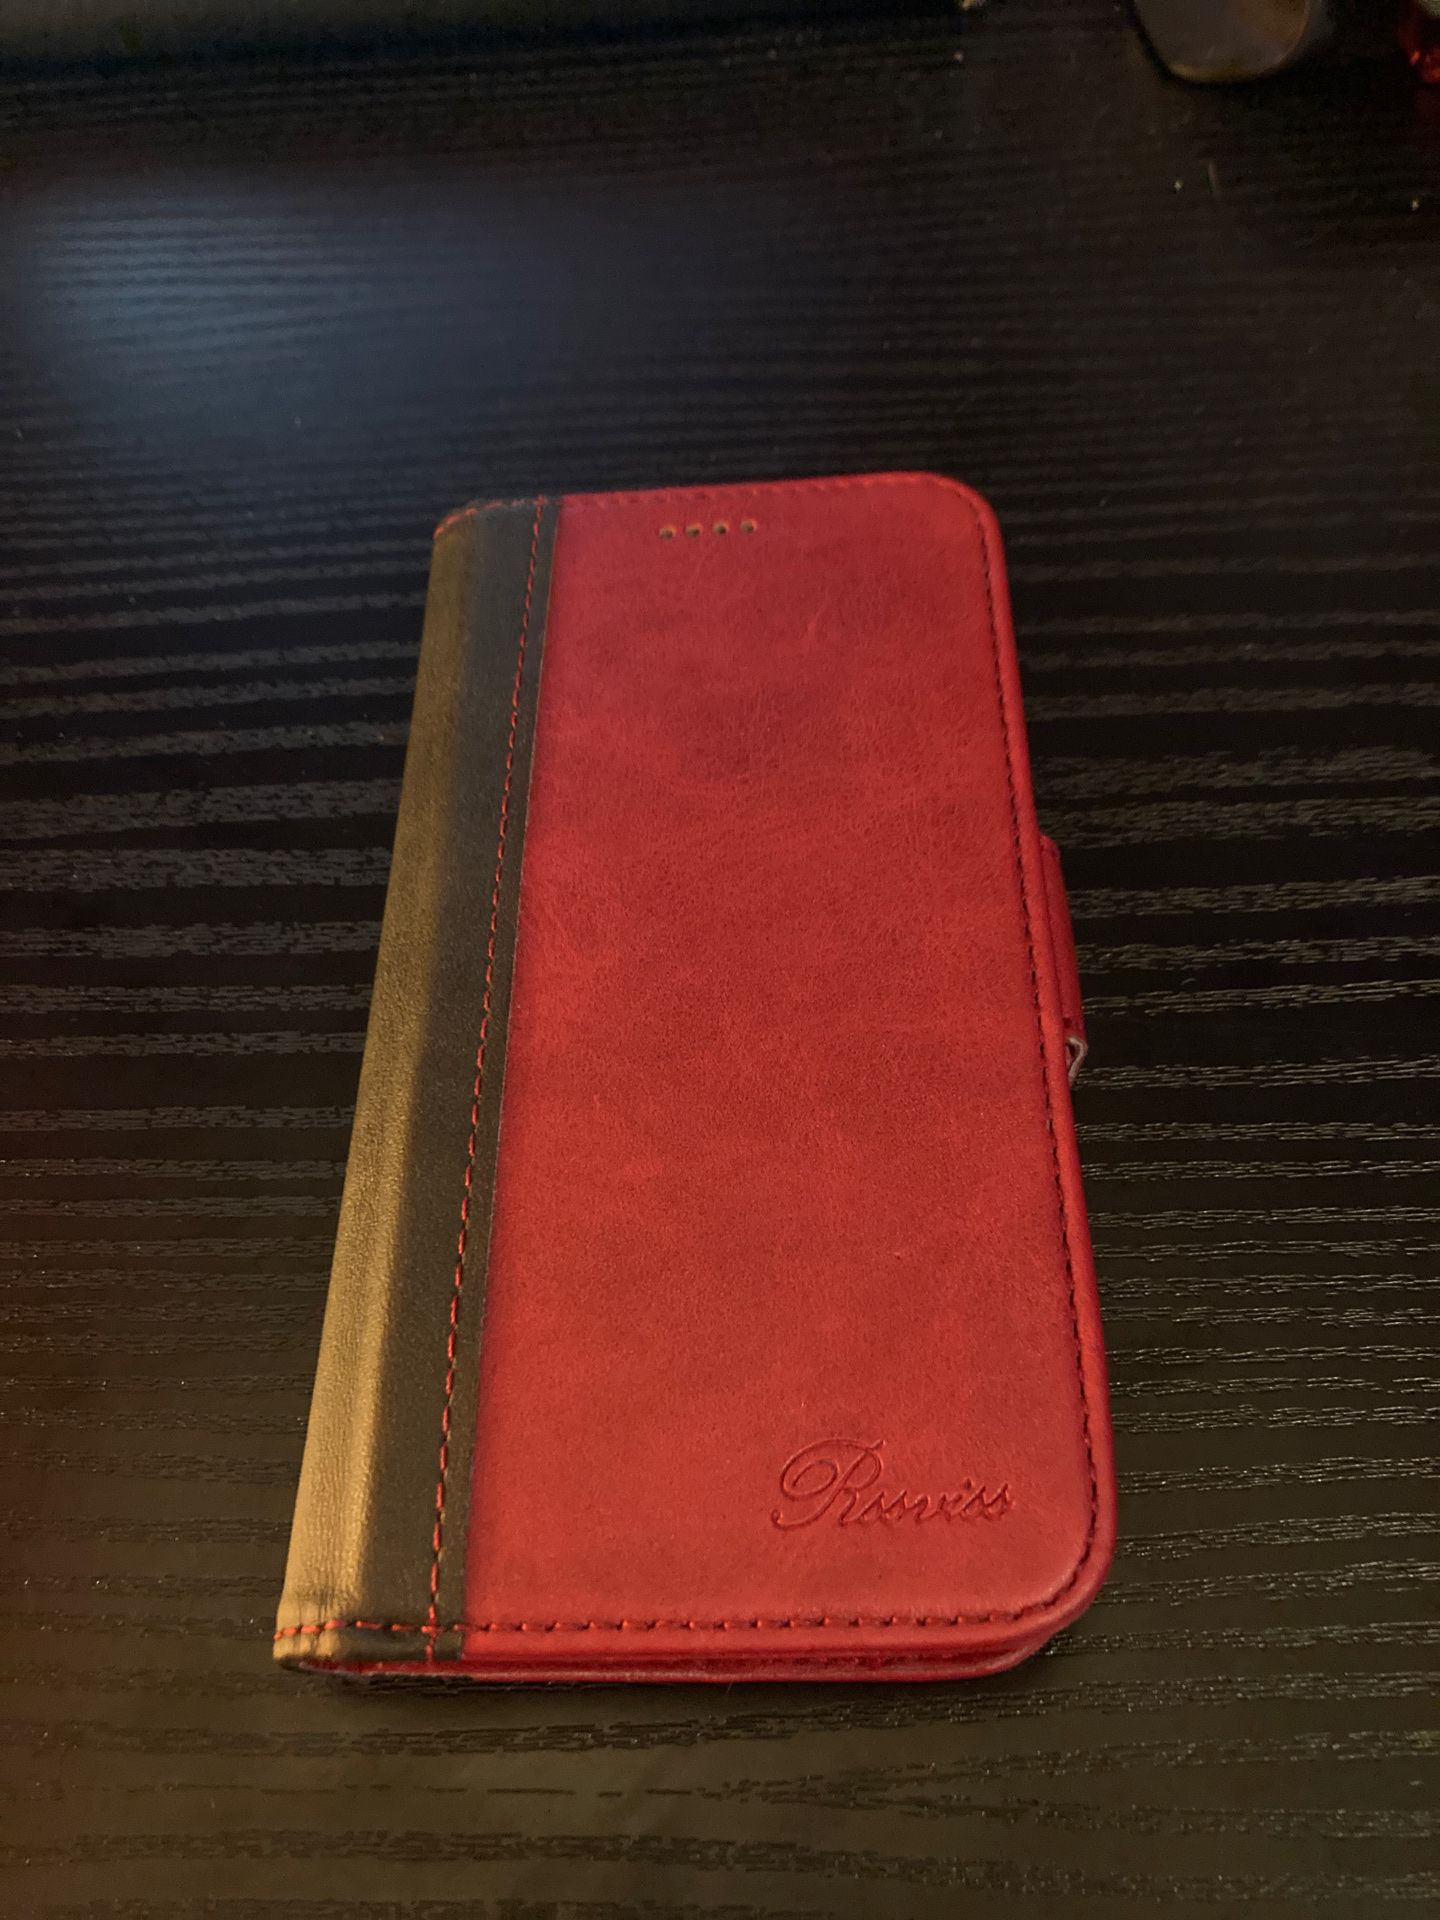 Red and black wallet case for iPhone X with condom sticker 🤘